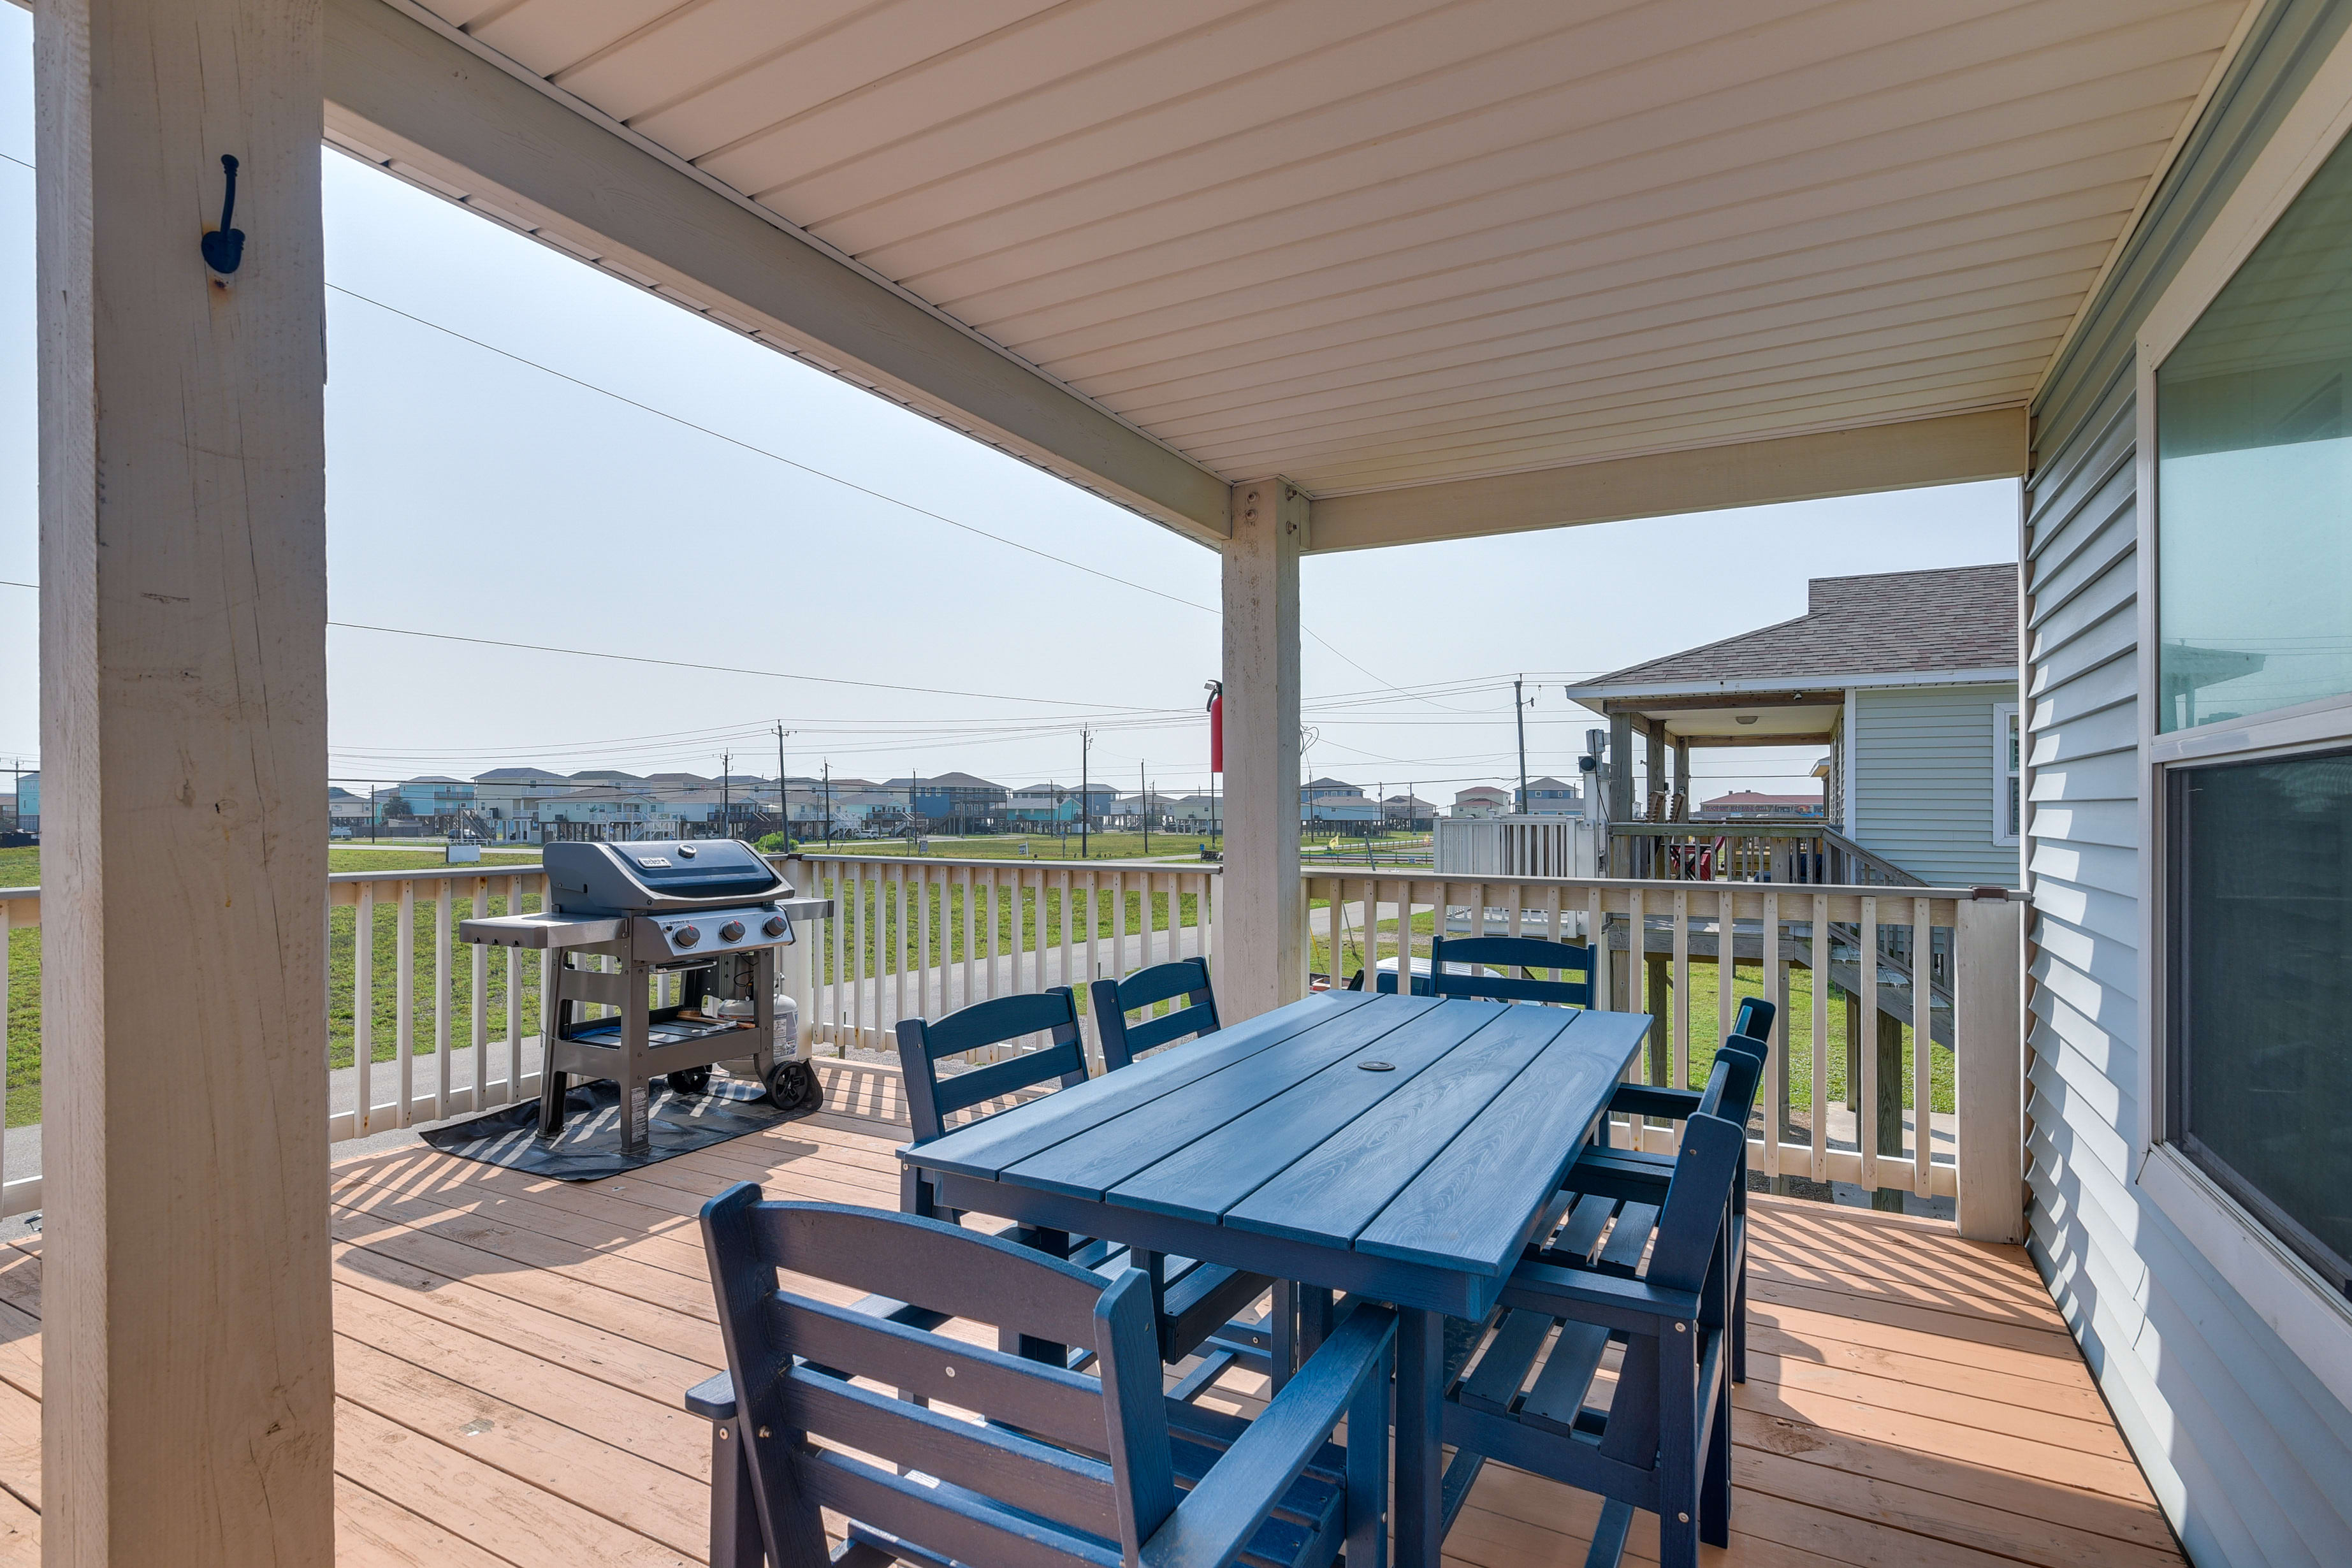 Private Deck | Outdoor Dining Area | Gas Grill